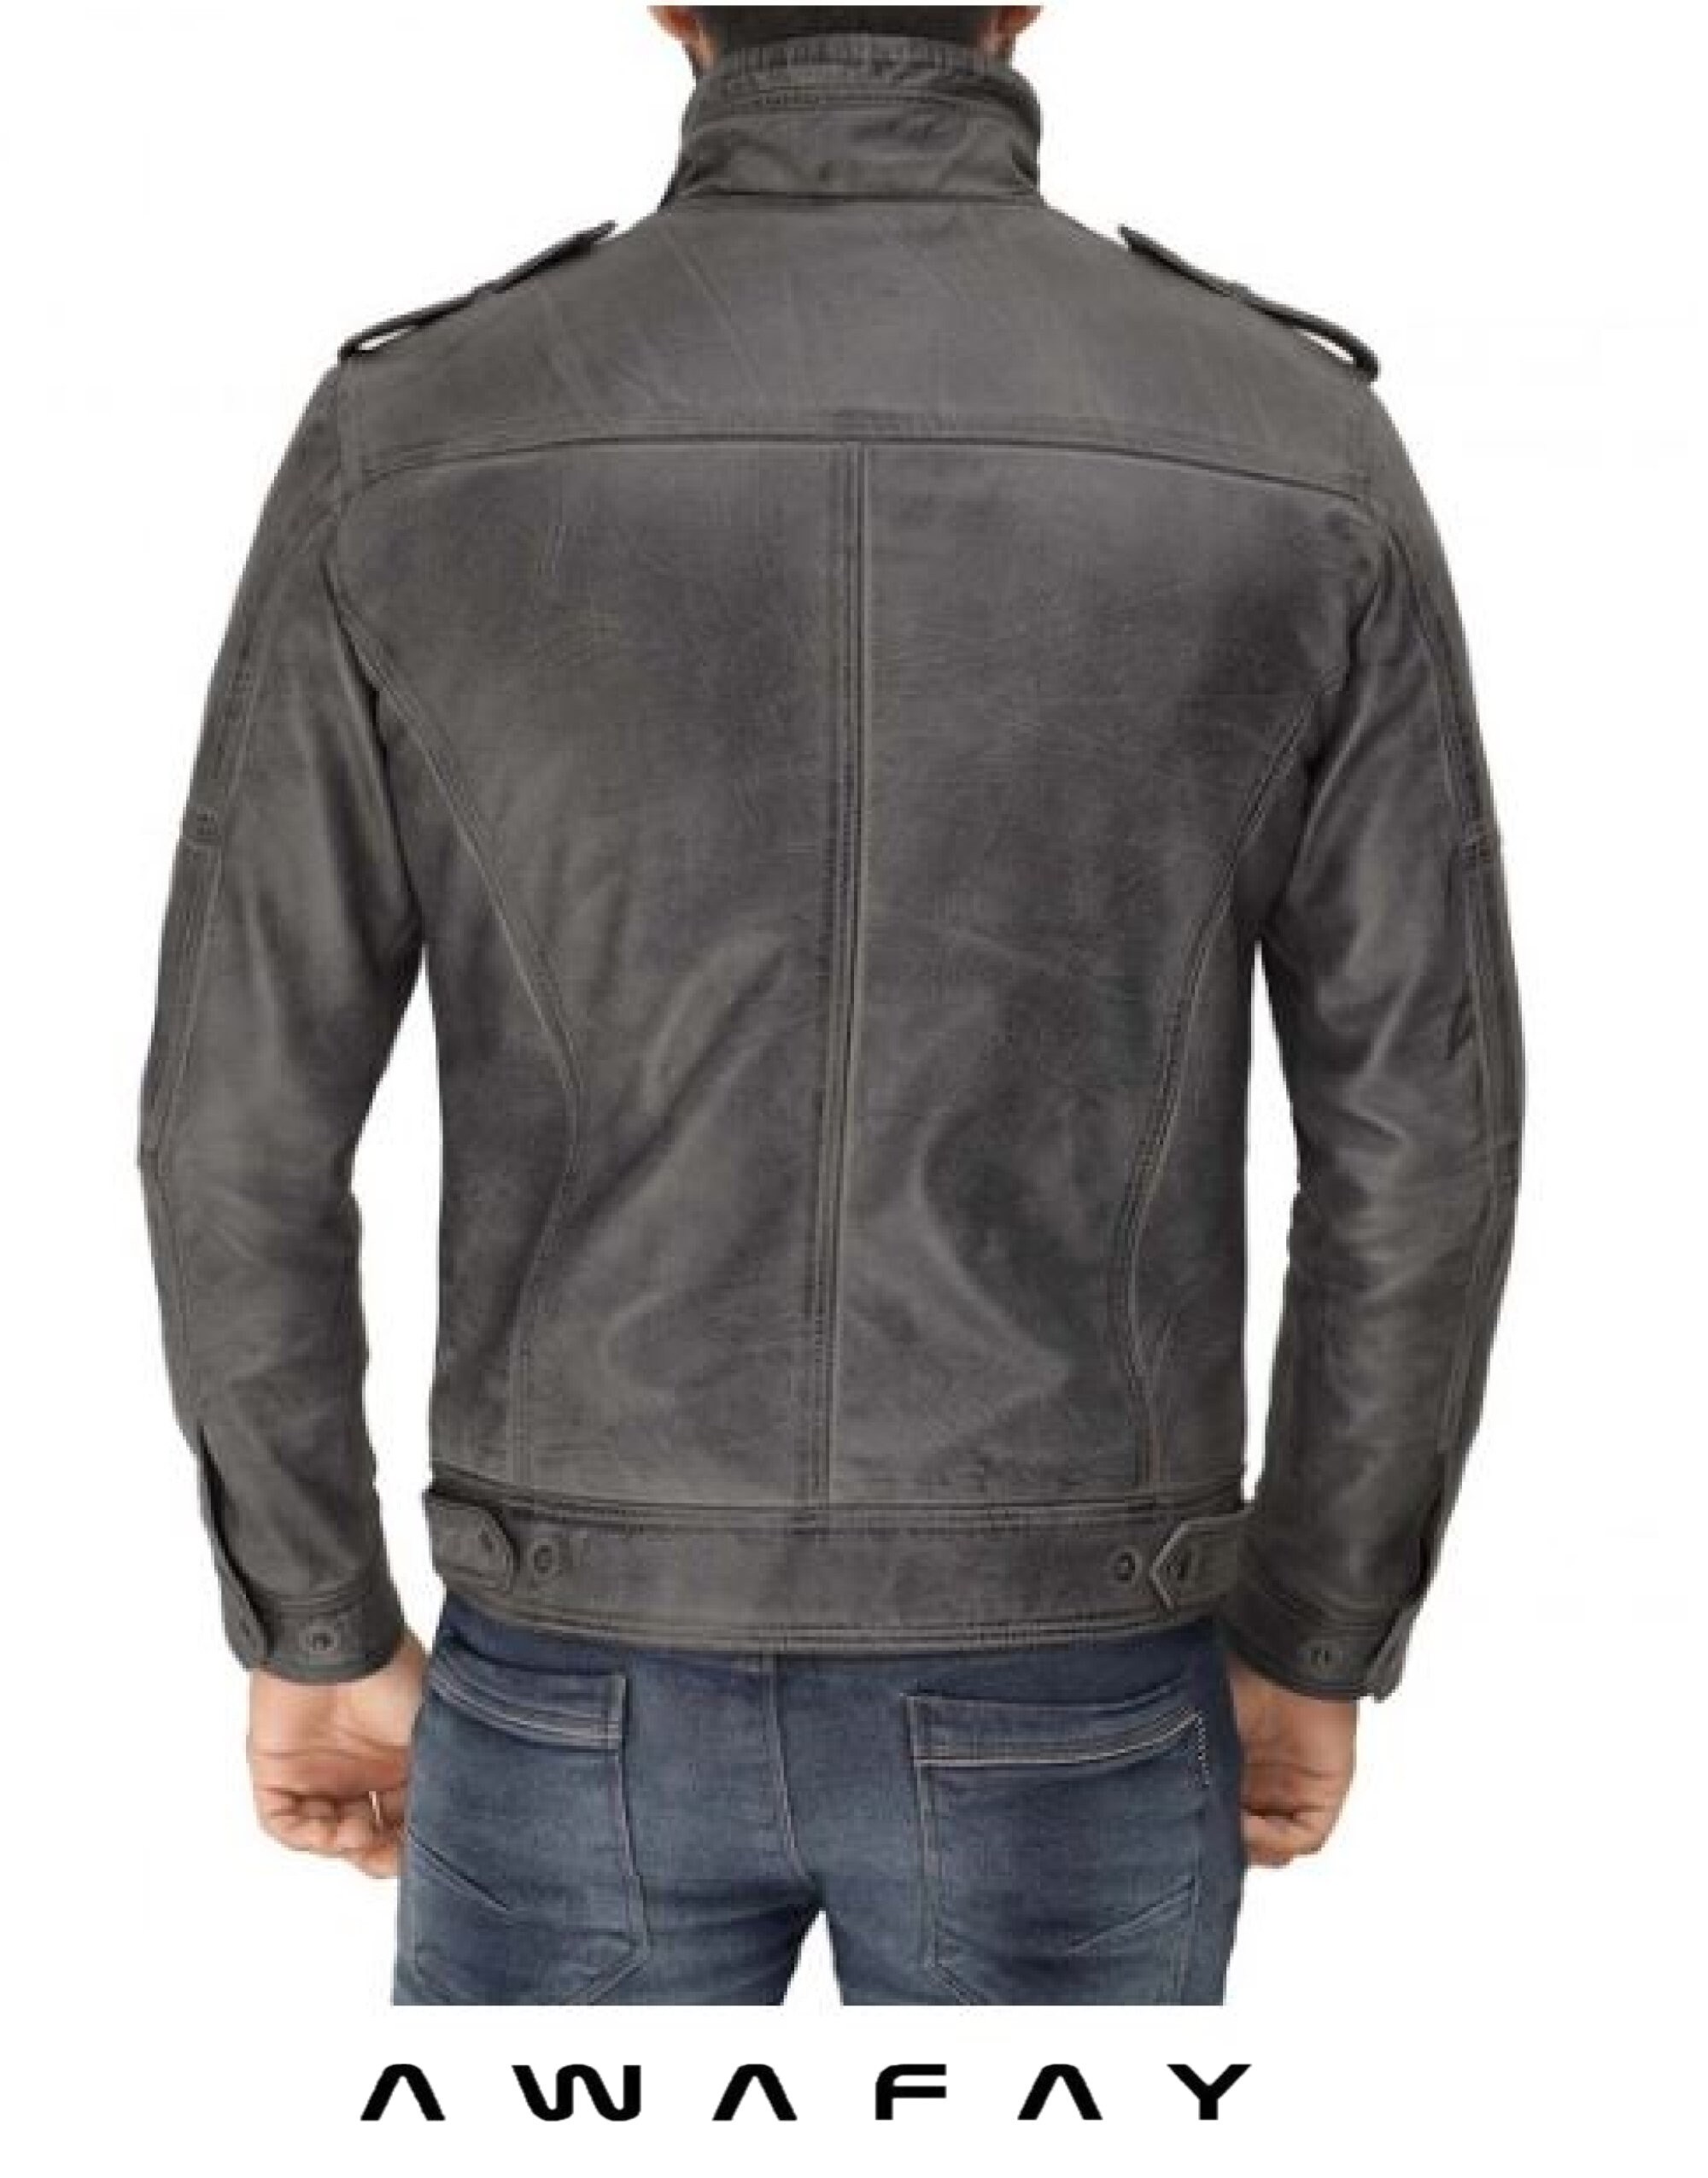 New Men's Genuine Soft Leather Jacket Real Lambskin Leather Slim Fit ...